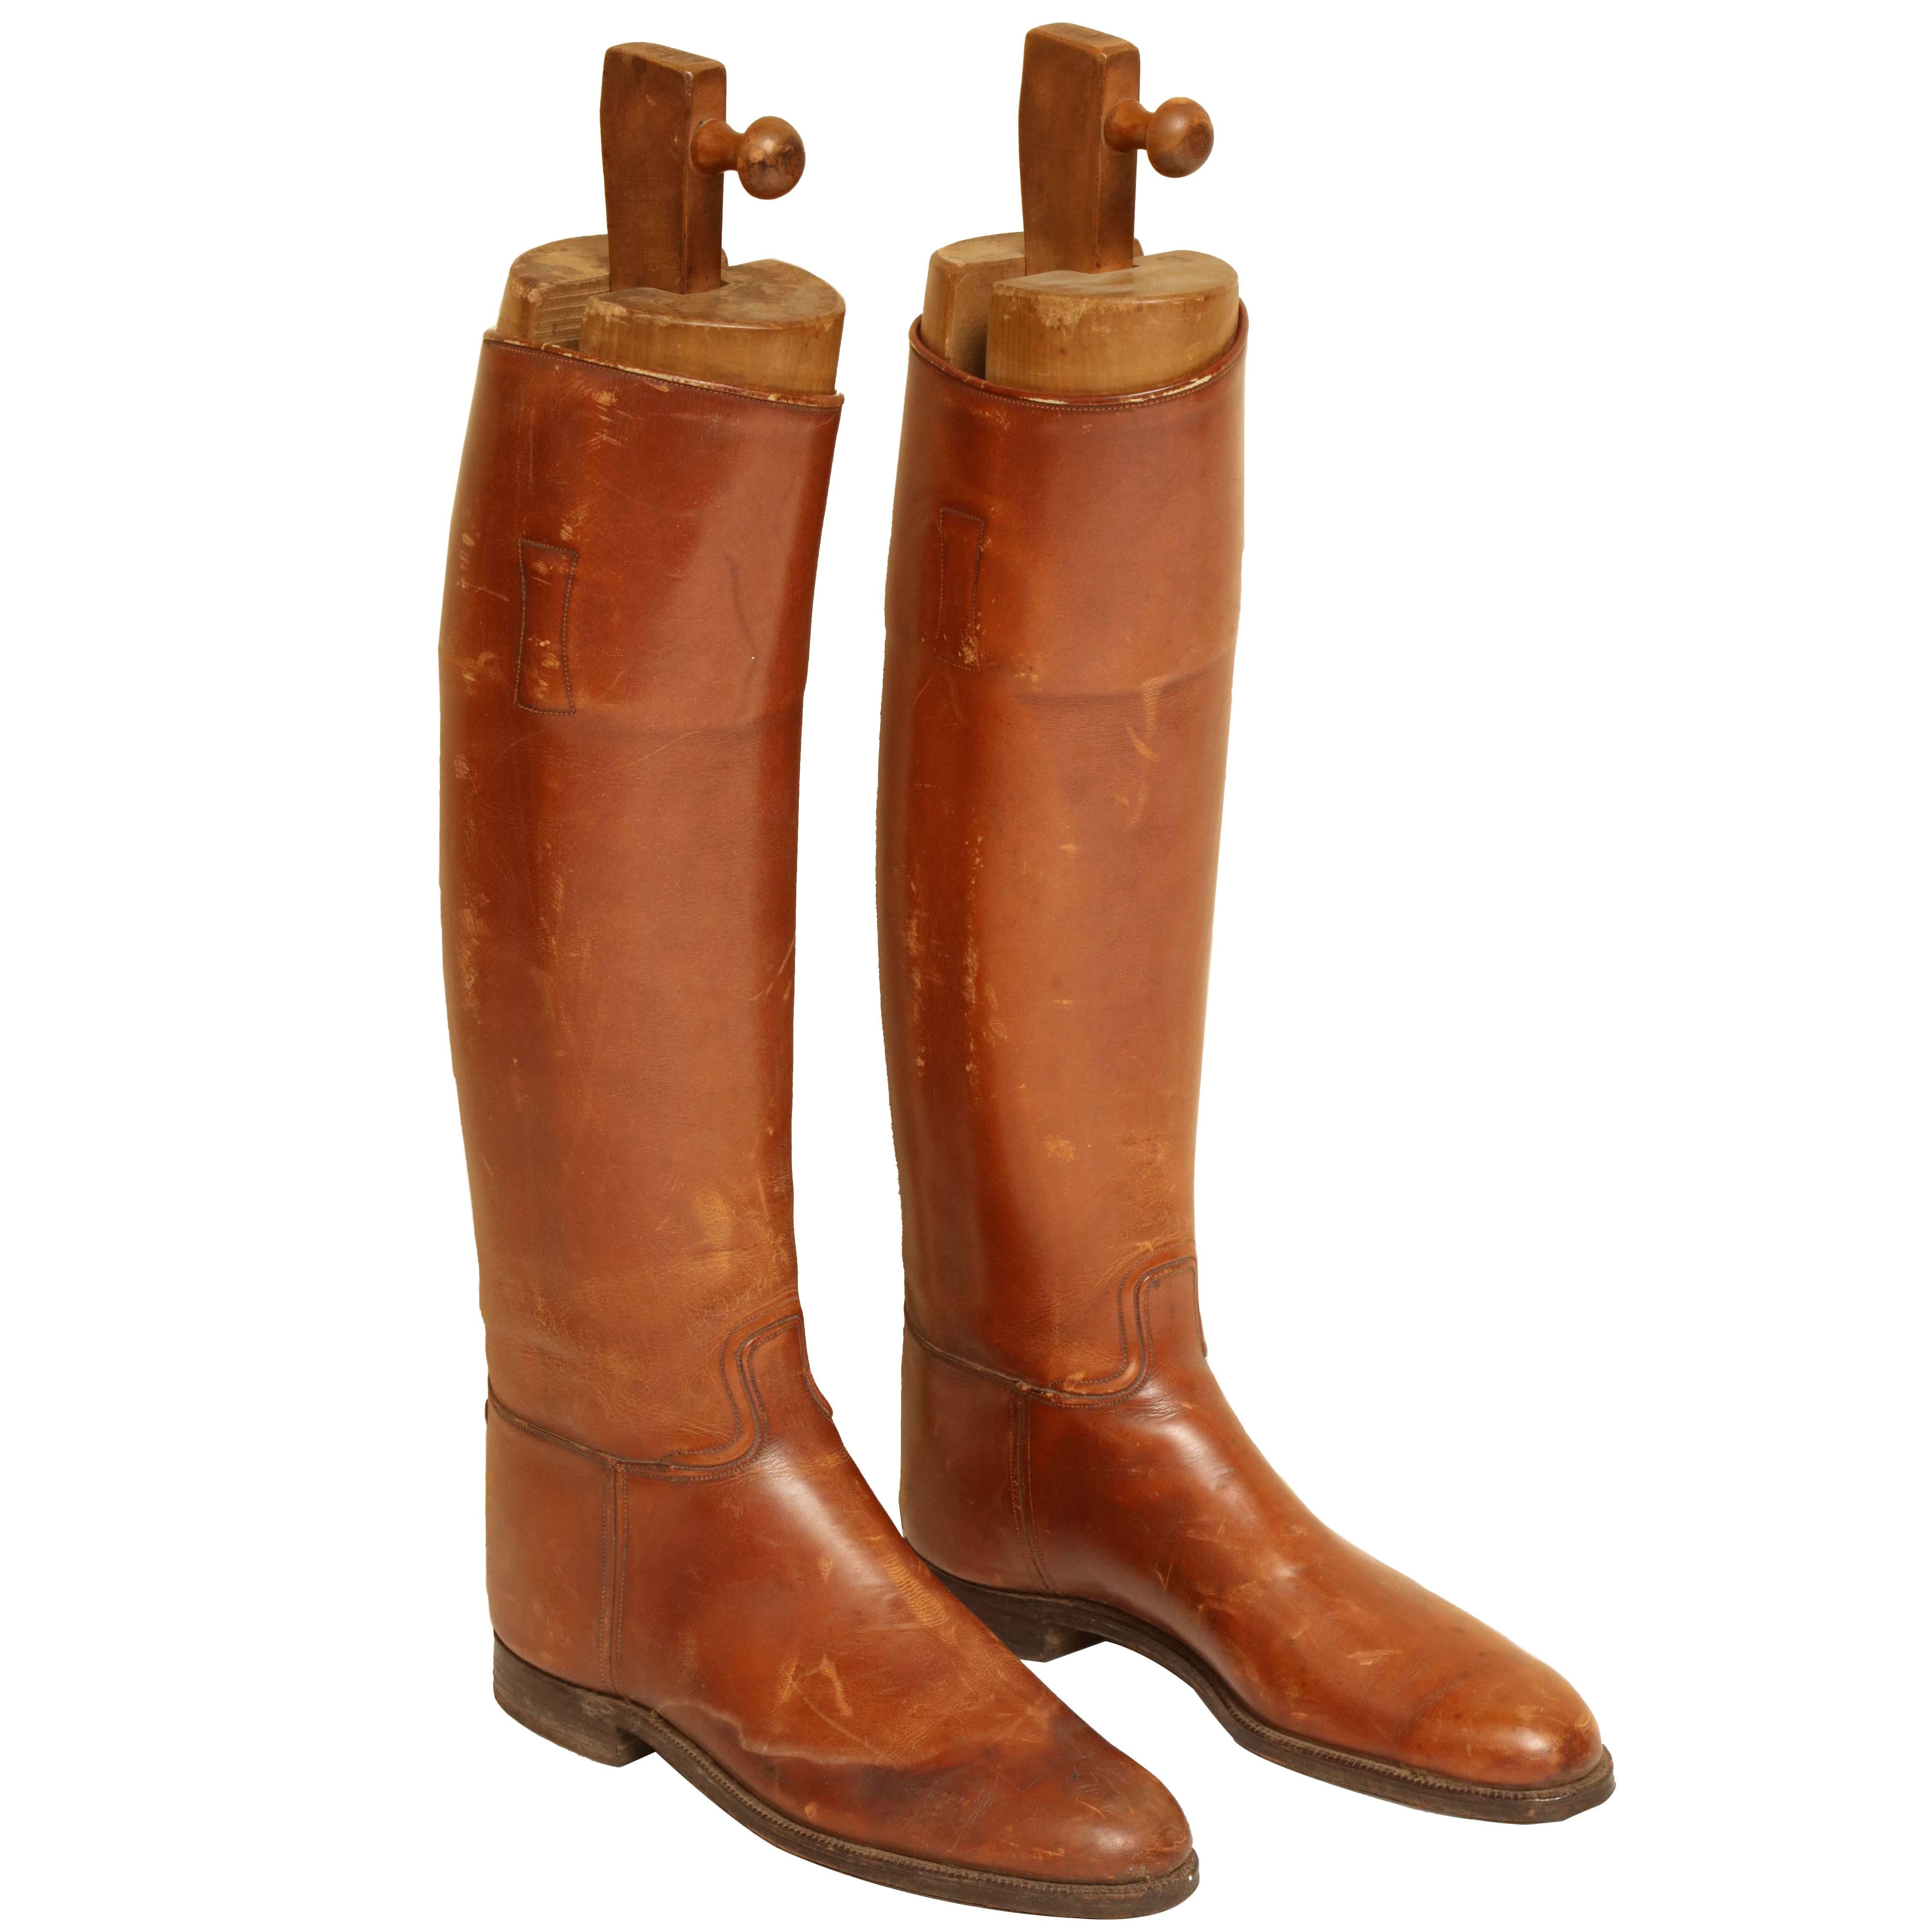 Pair of English Riding Boots with Custom Boot Trees